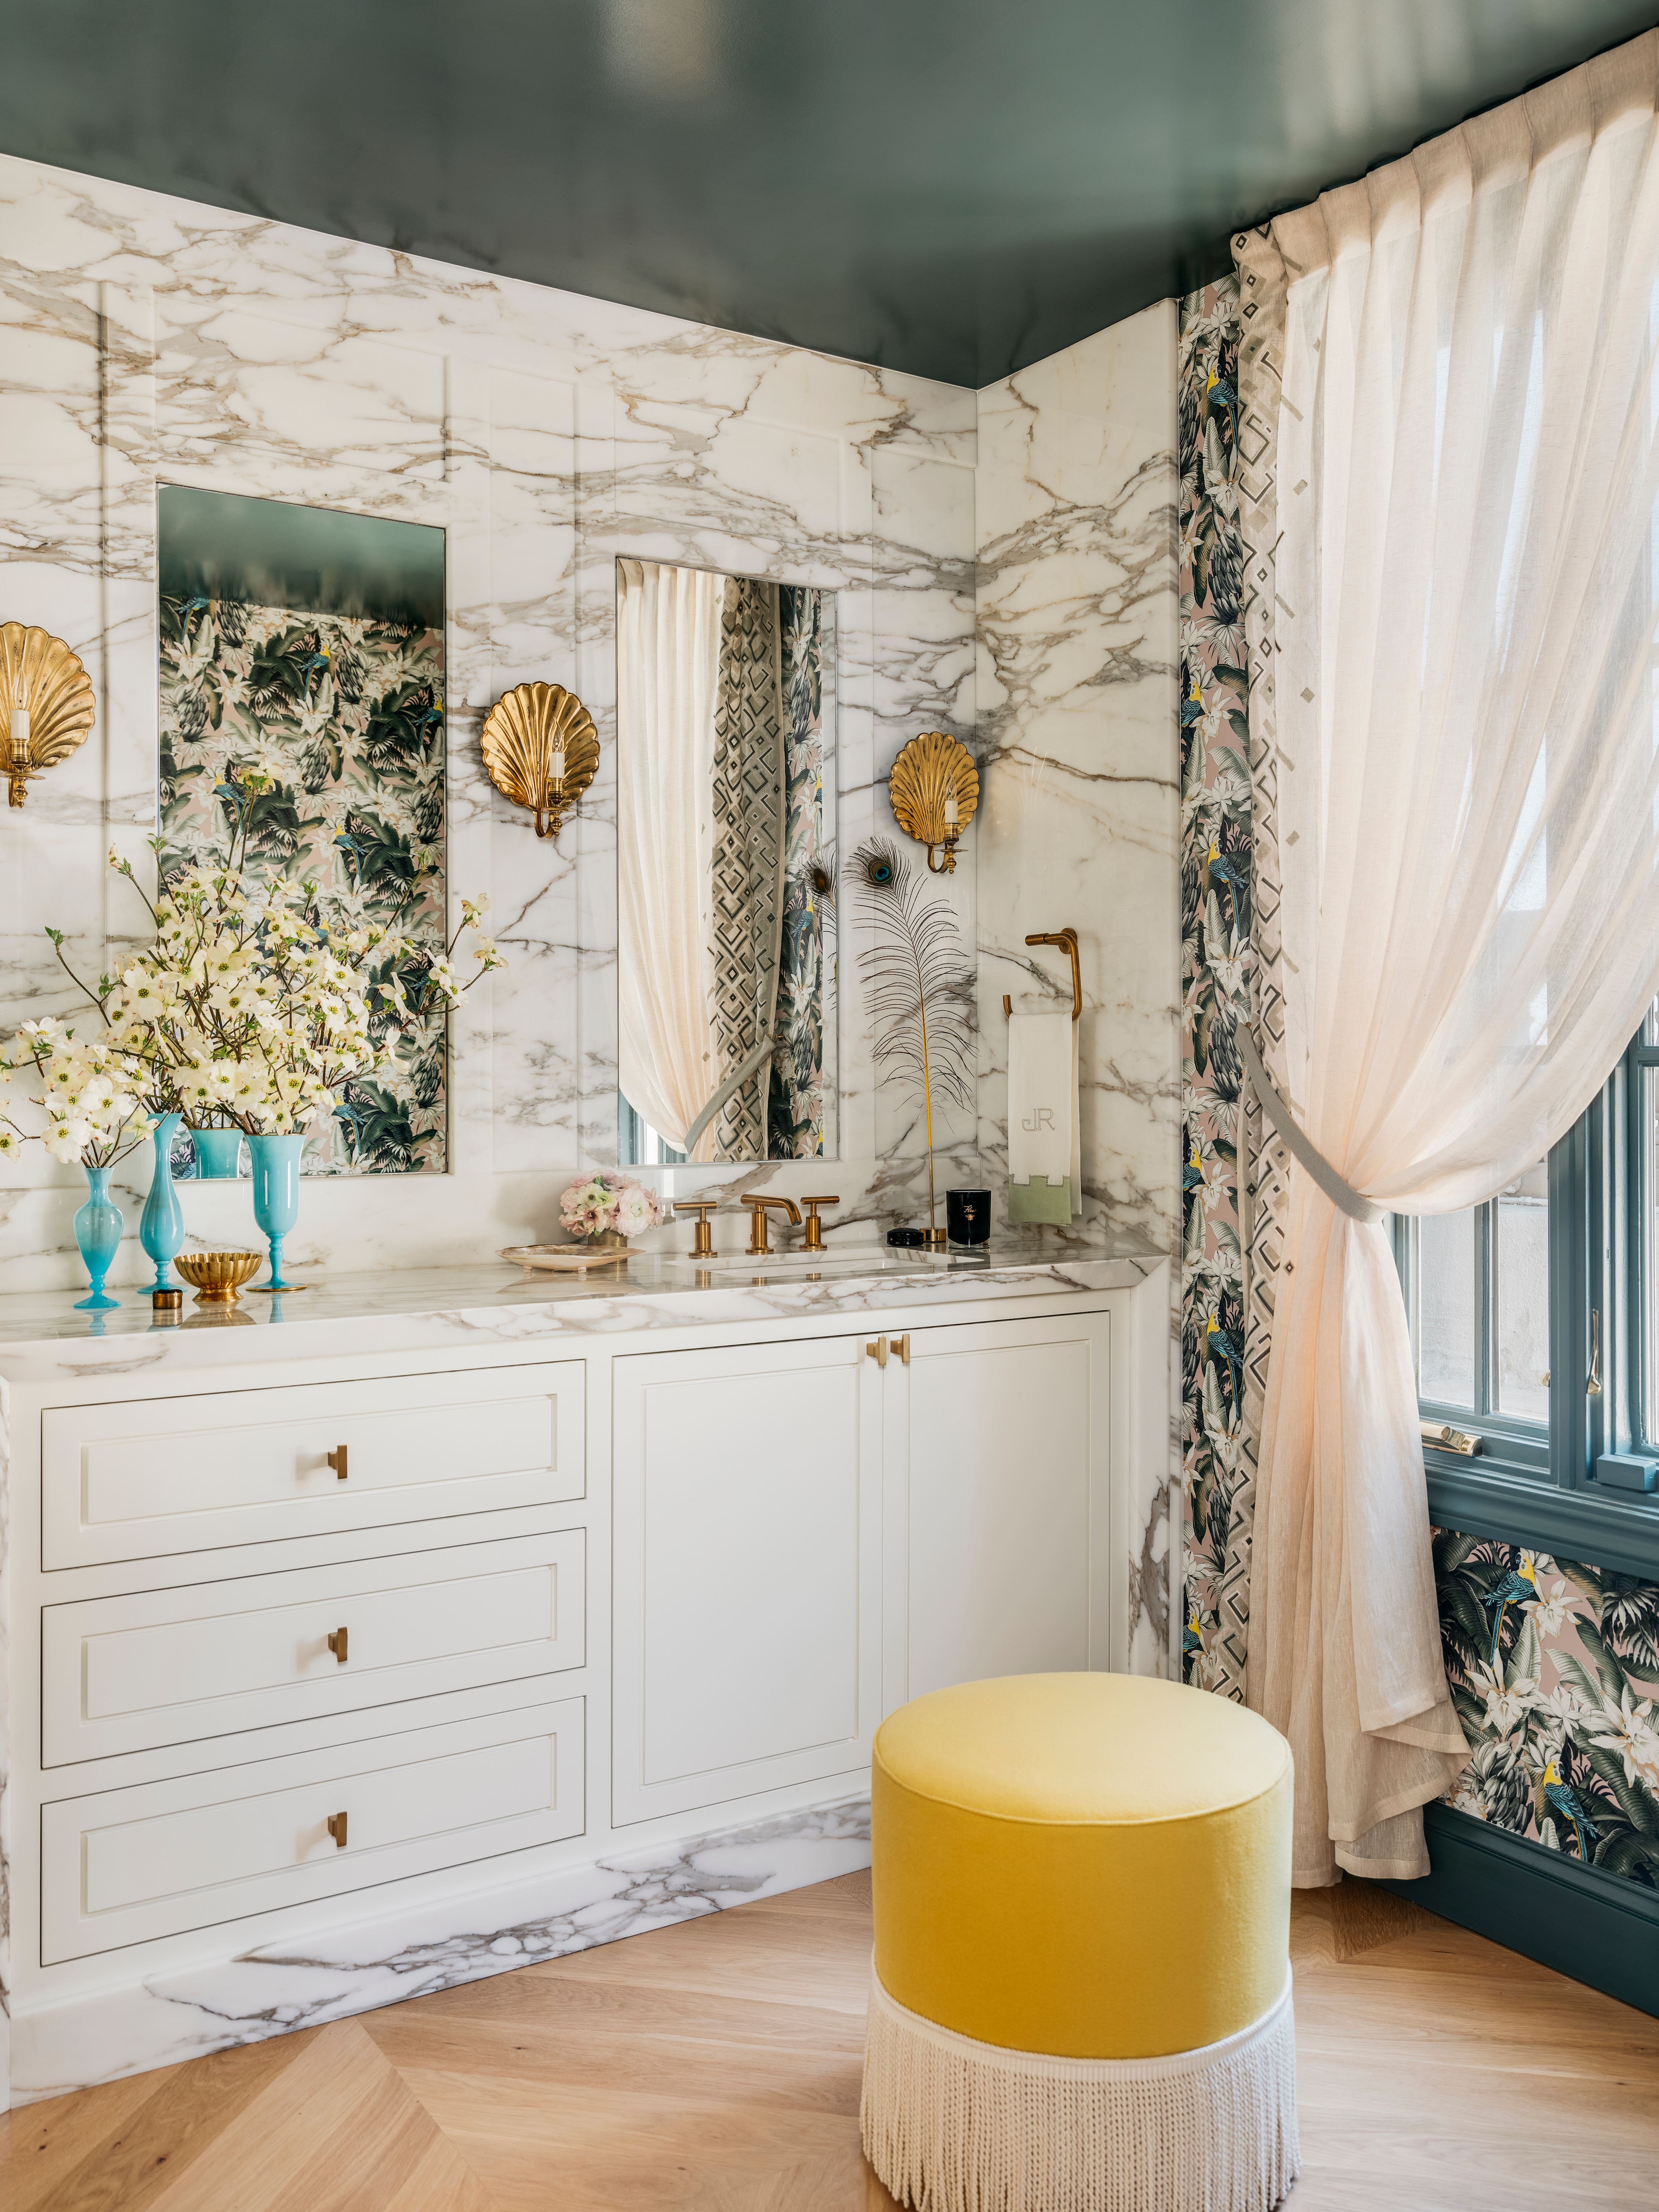 If This Is What a Modern Versailles Bathroom Looks Like, We’re In